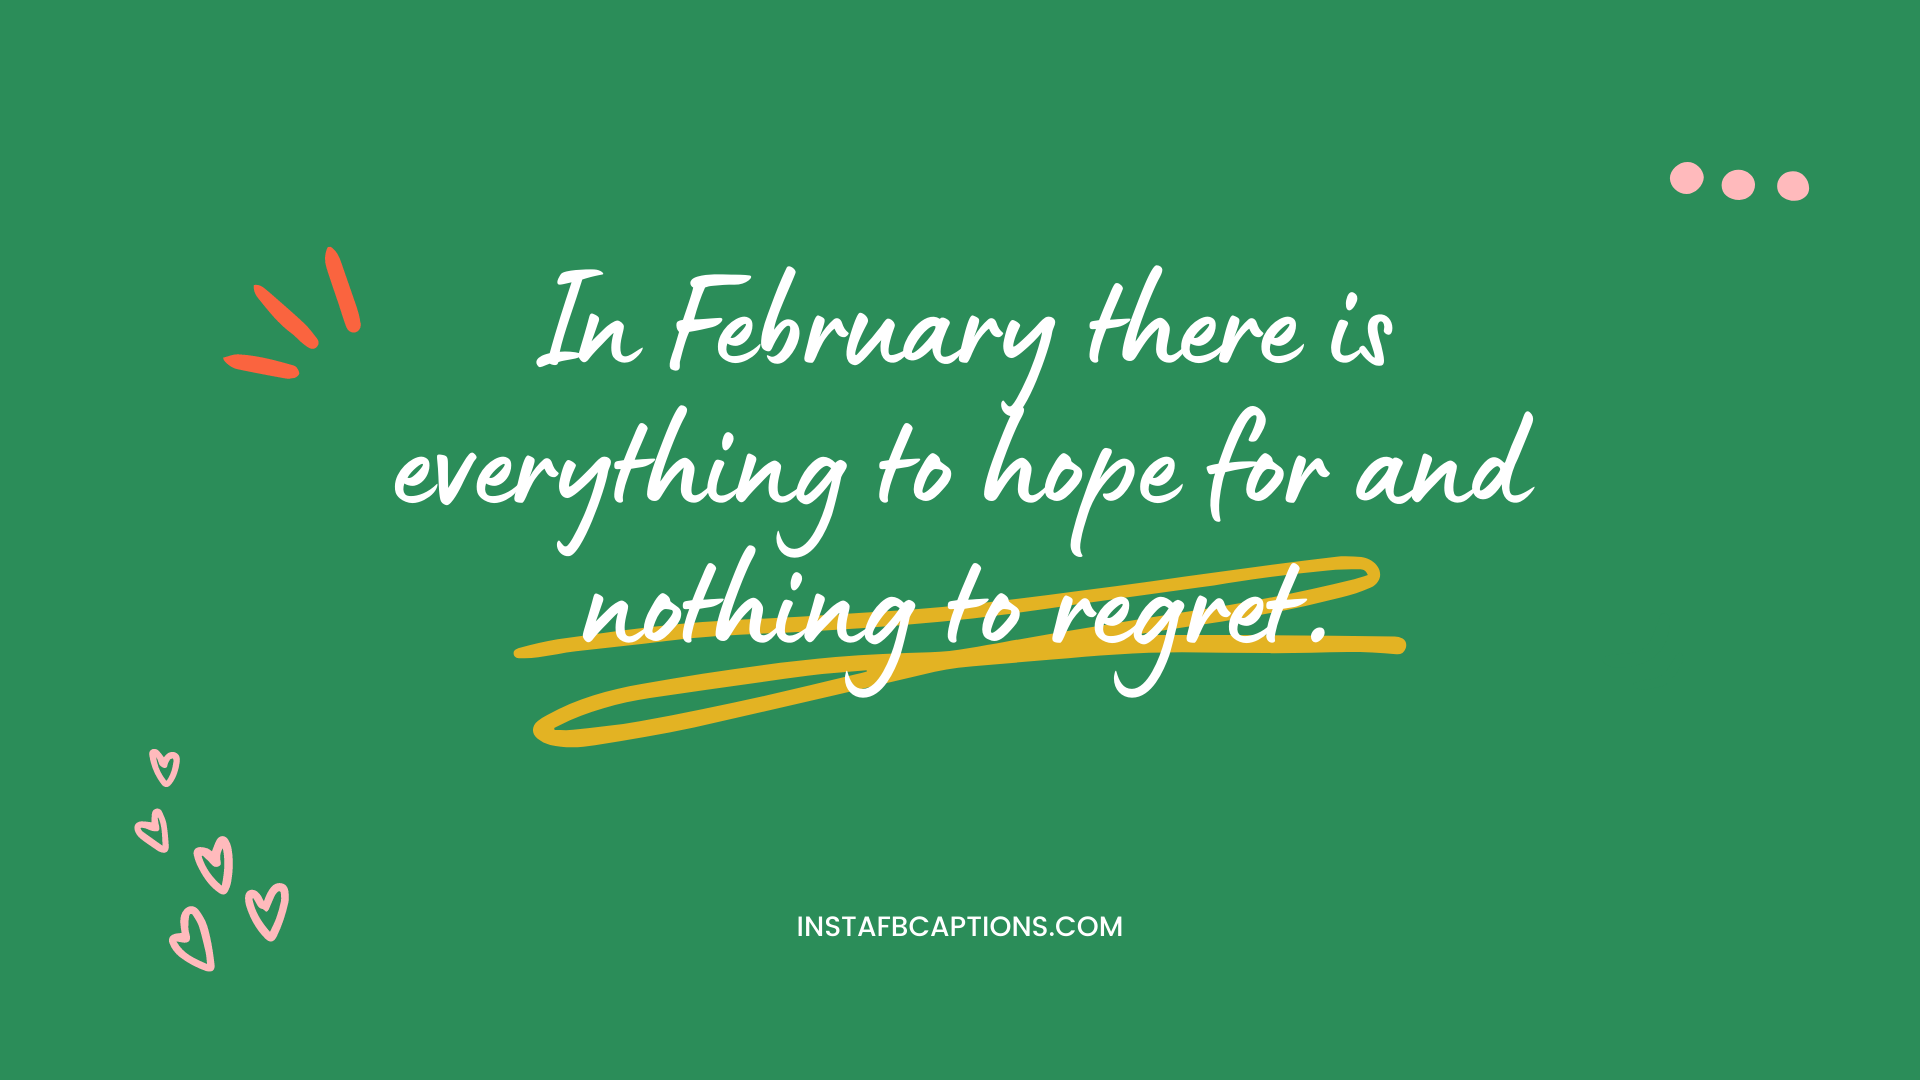 Sayings On February To Use As Captions For Instagram  - Sayings on February to Use as Captions for Instagram - 58+ LEAP YEAR Instagram Captions for Birthdays &#038; February in 2022